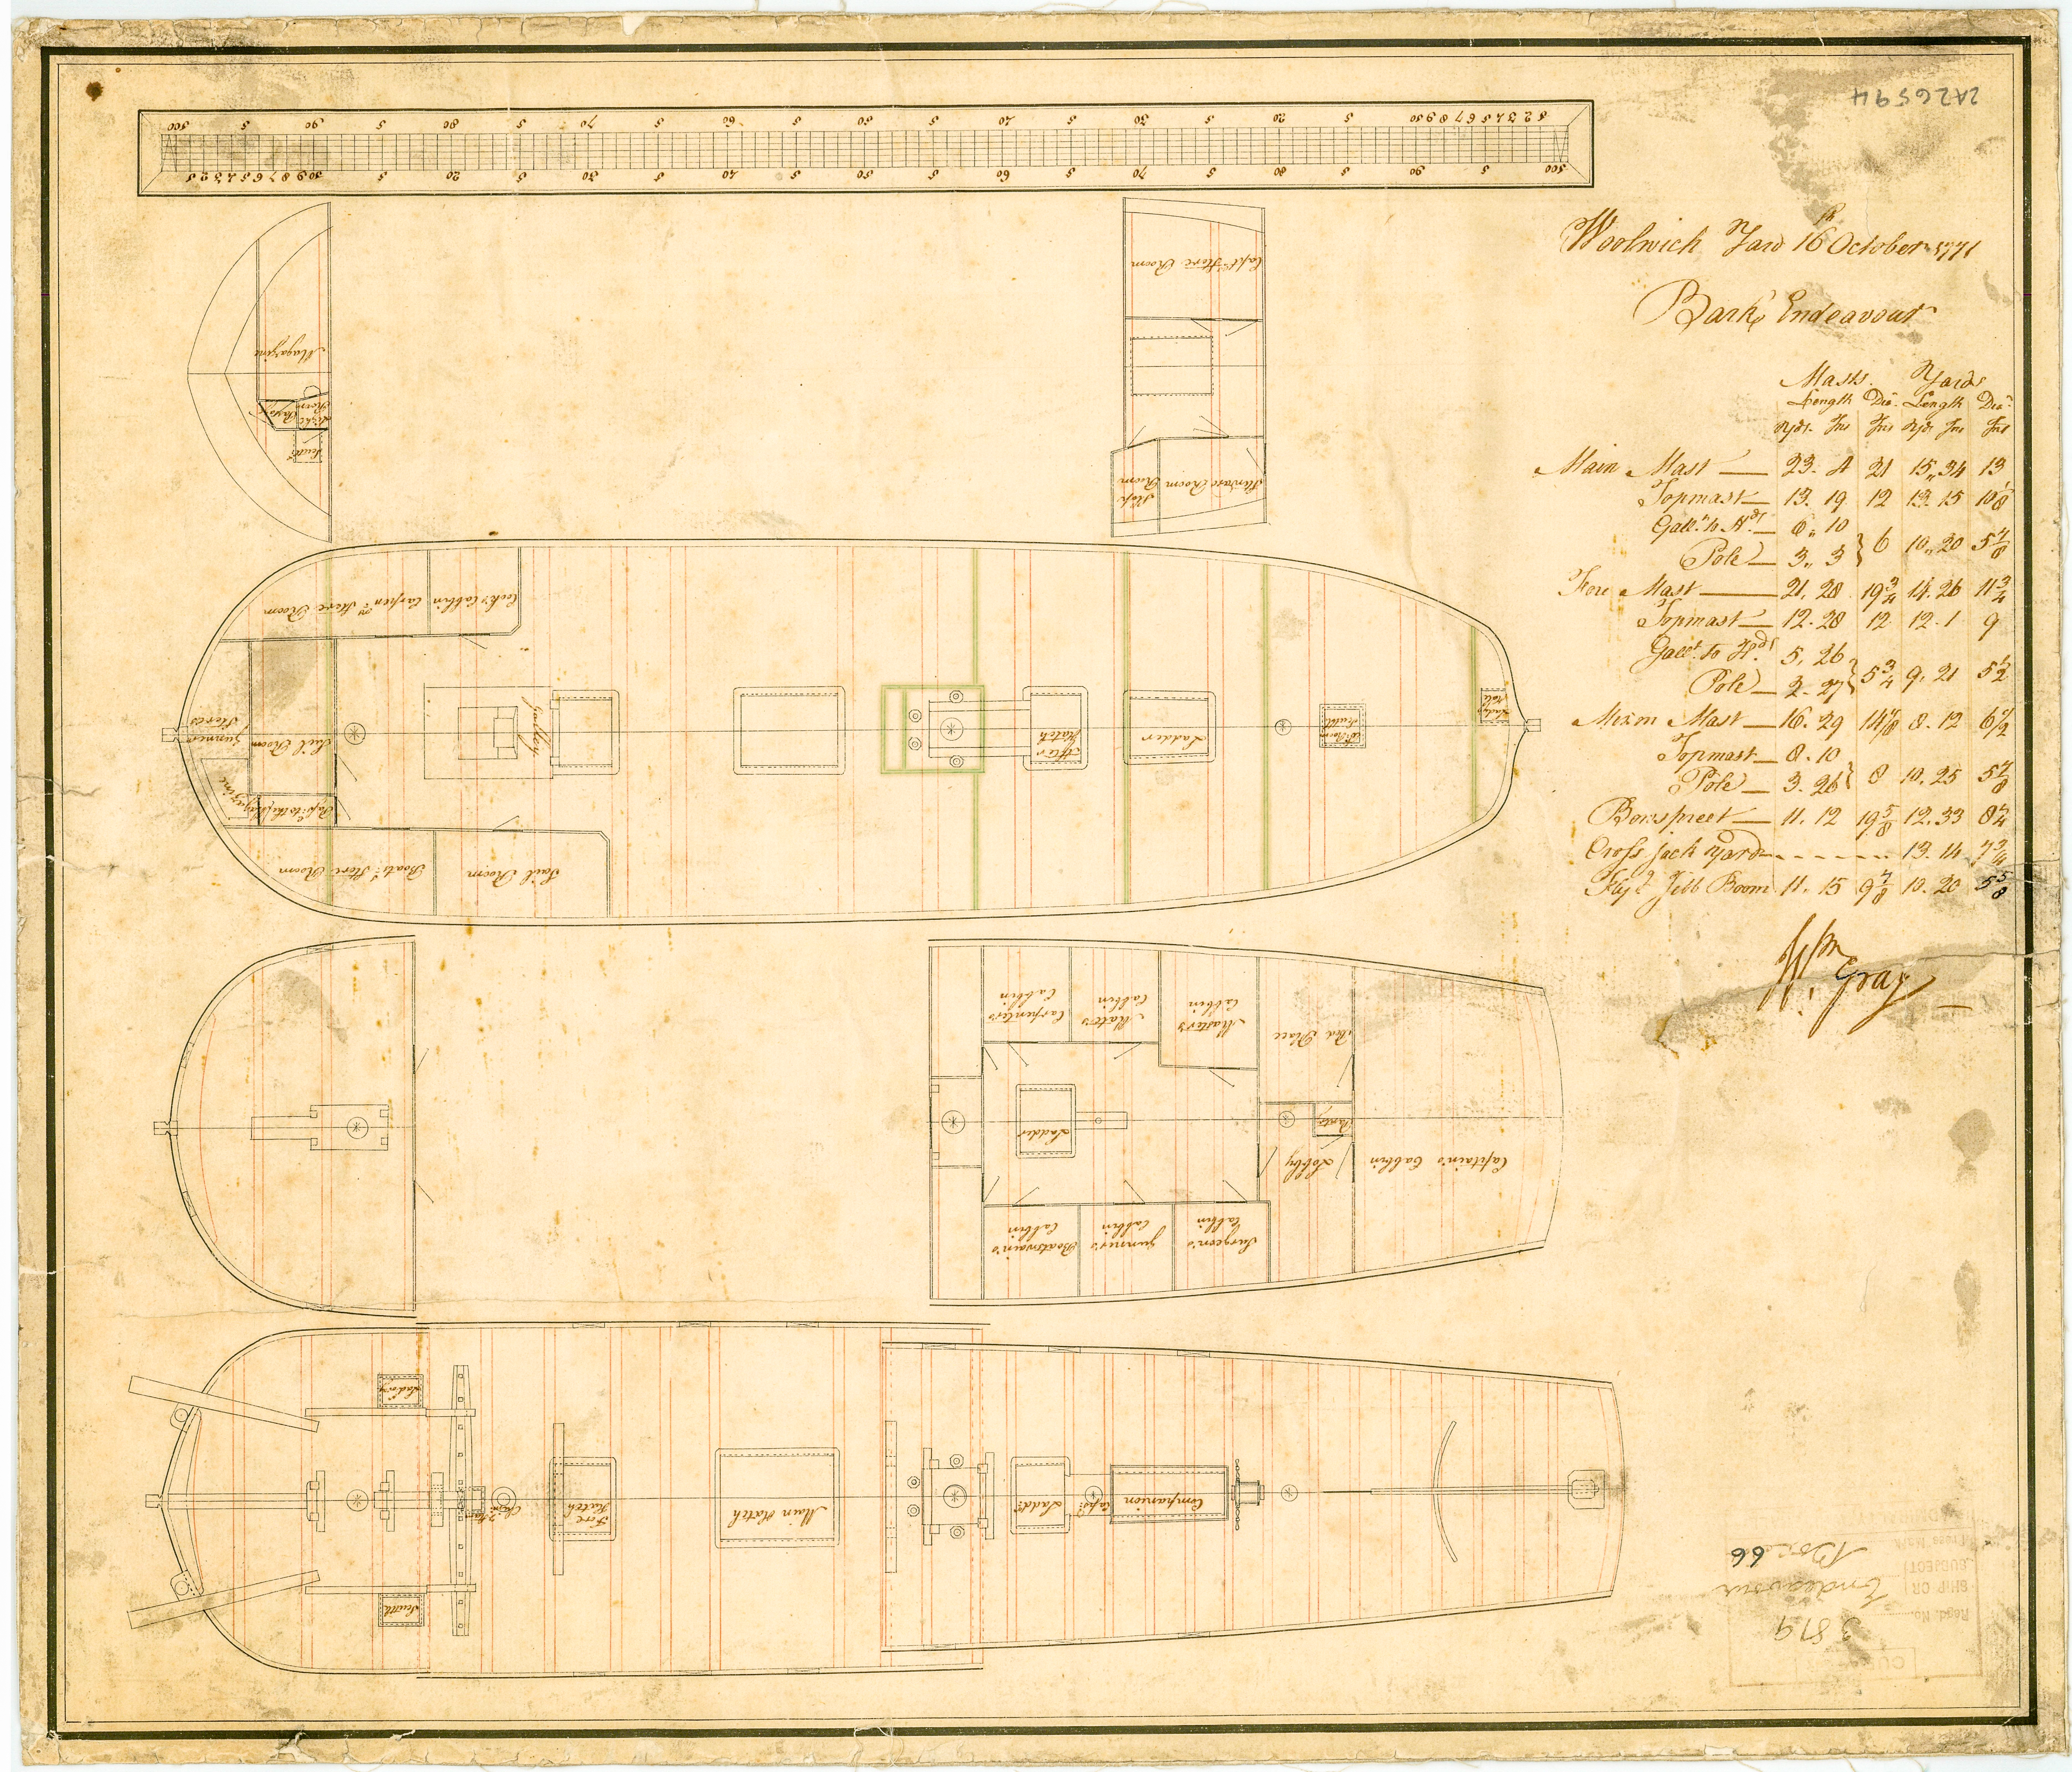 A handrawn plan of the HMB Endeavour showing key measurements of the ship 